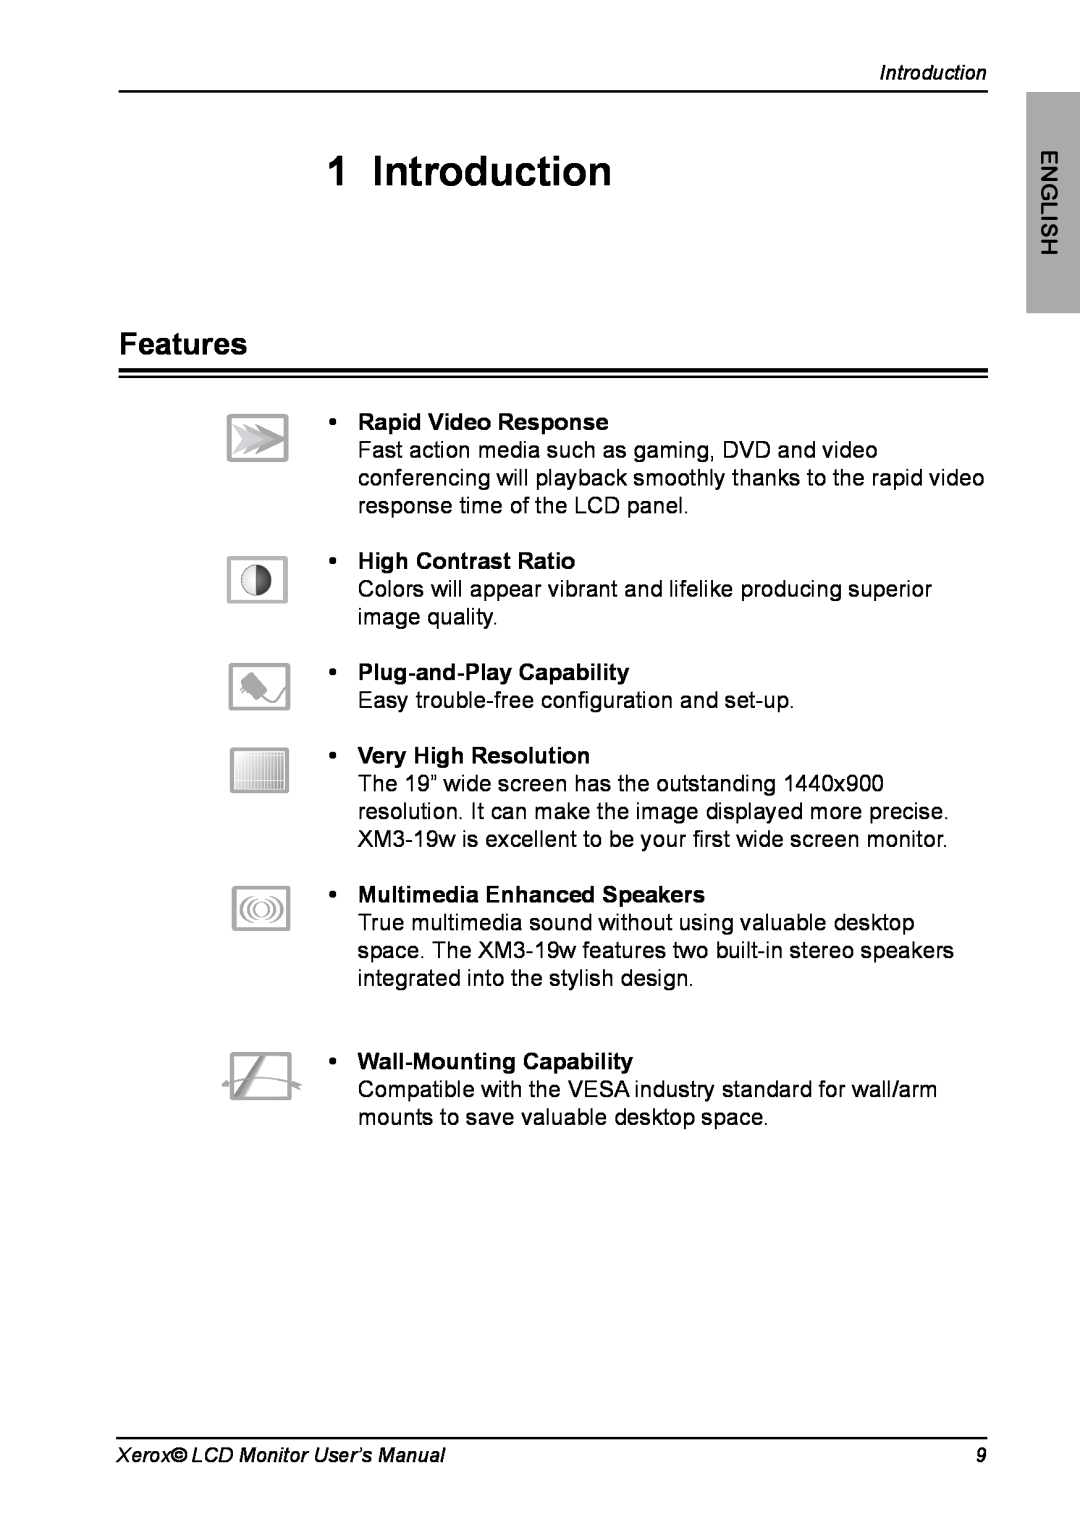 Xerox XM3-19w manual Introduction, Features, Rapid Video Response, High Contrast Ratio, Plug-and-Play Capability, English 